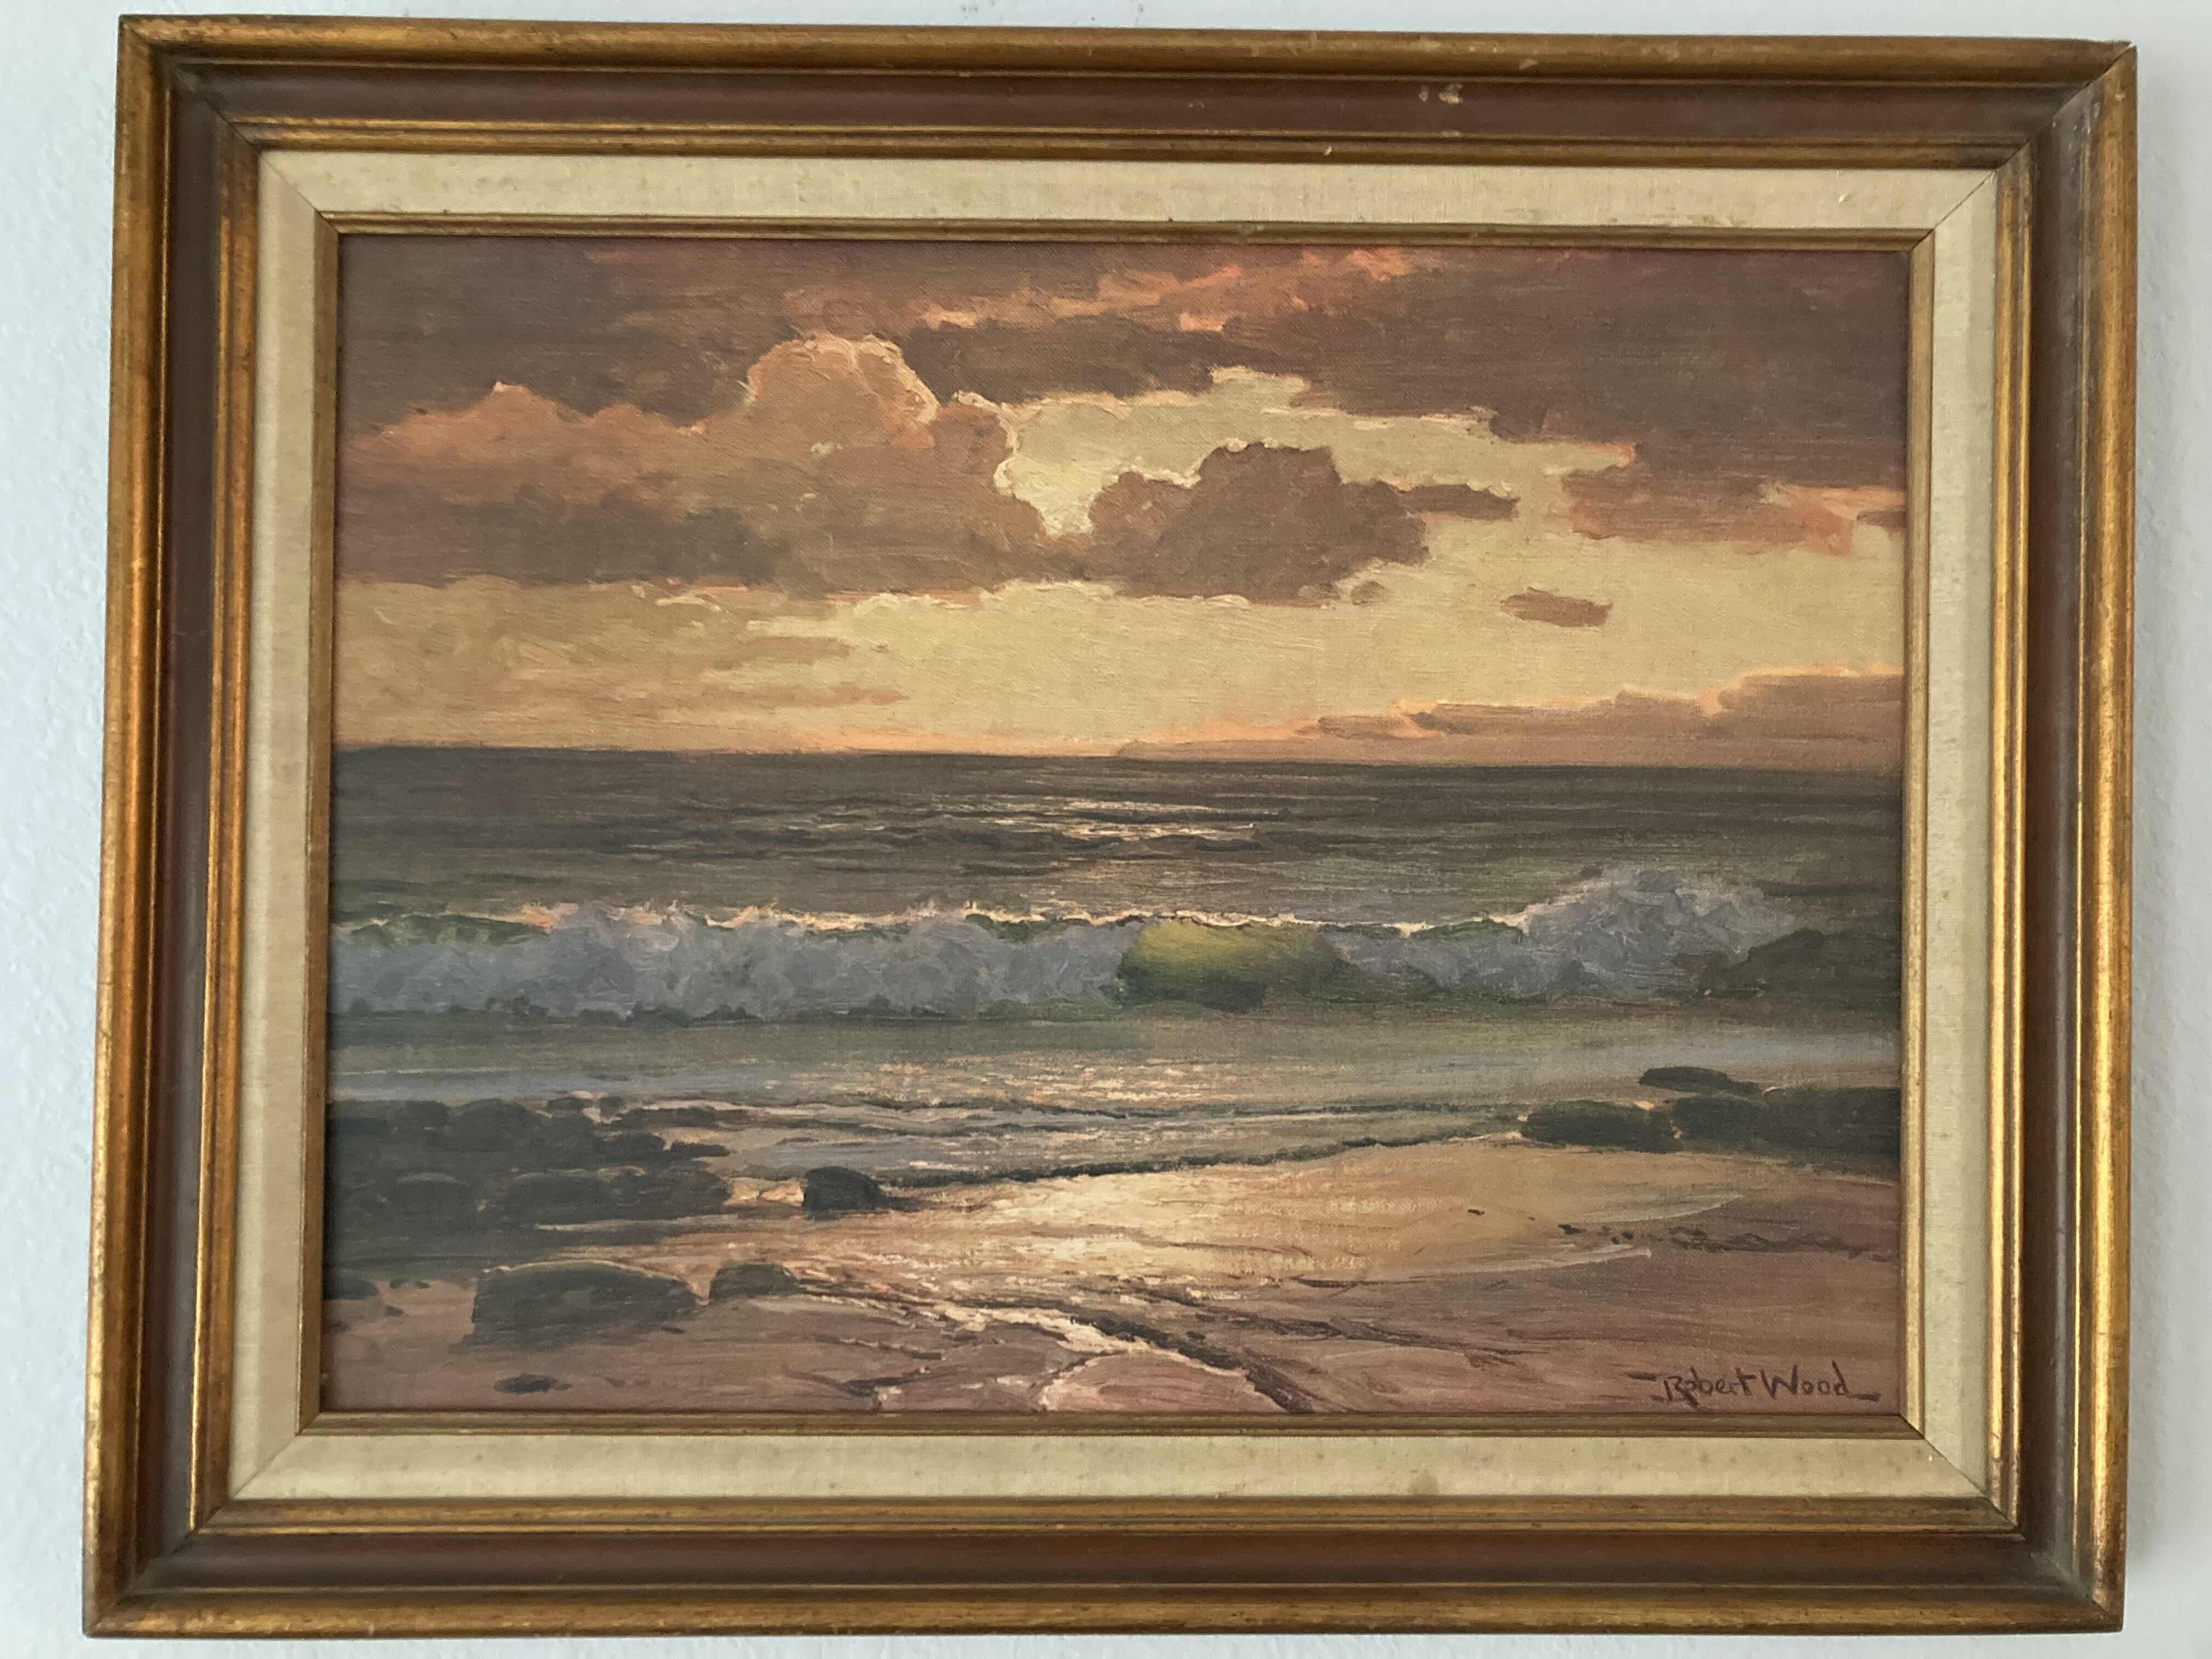 Photo 1 of OCEAN AT SUNRISE FRAMED CANVAS ARTWORK SIGNED BY ROBERT WOOD 29” X 23”